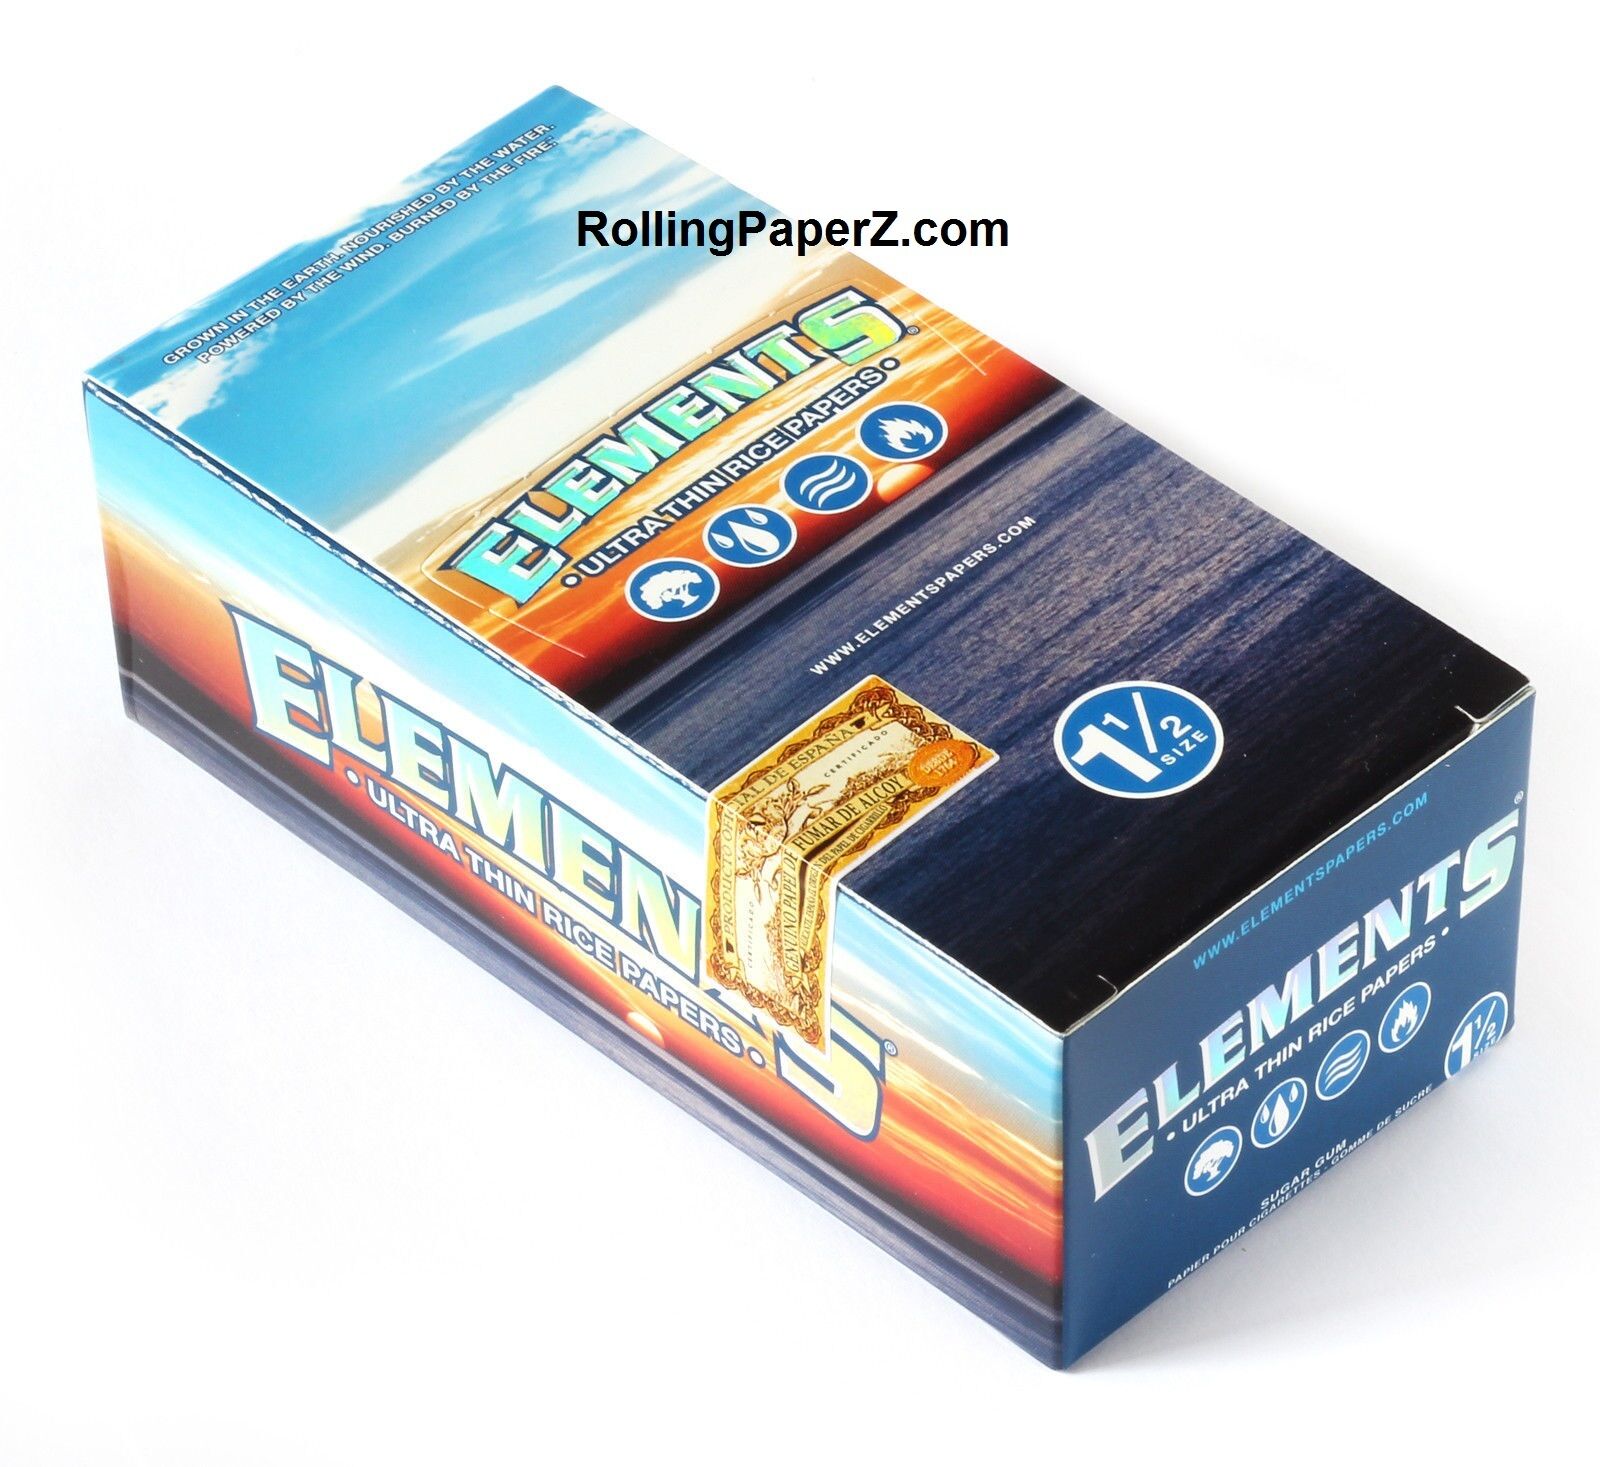 Elements Rice Cigarette Rolling Papers 1 1/2 Full Box 25 Packs/33 leaves each